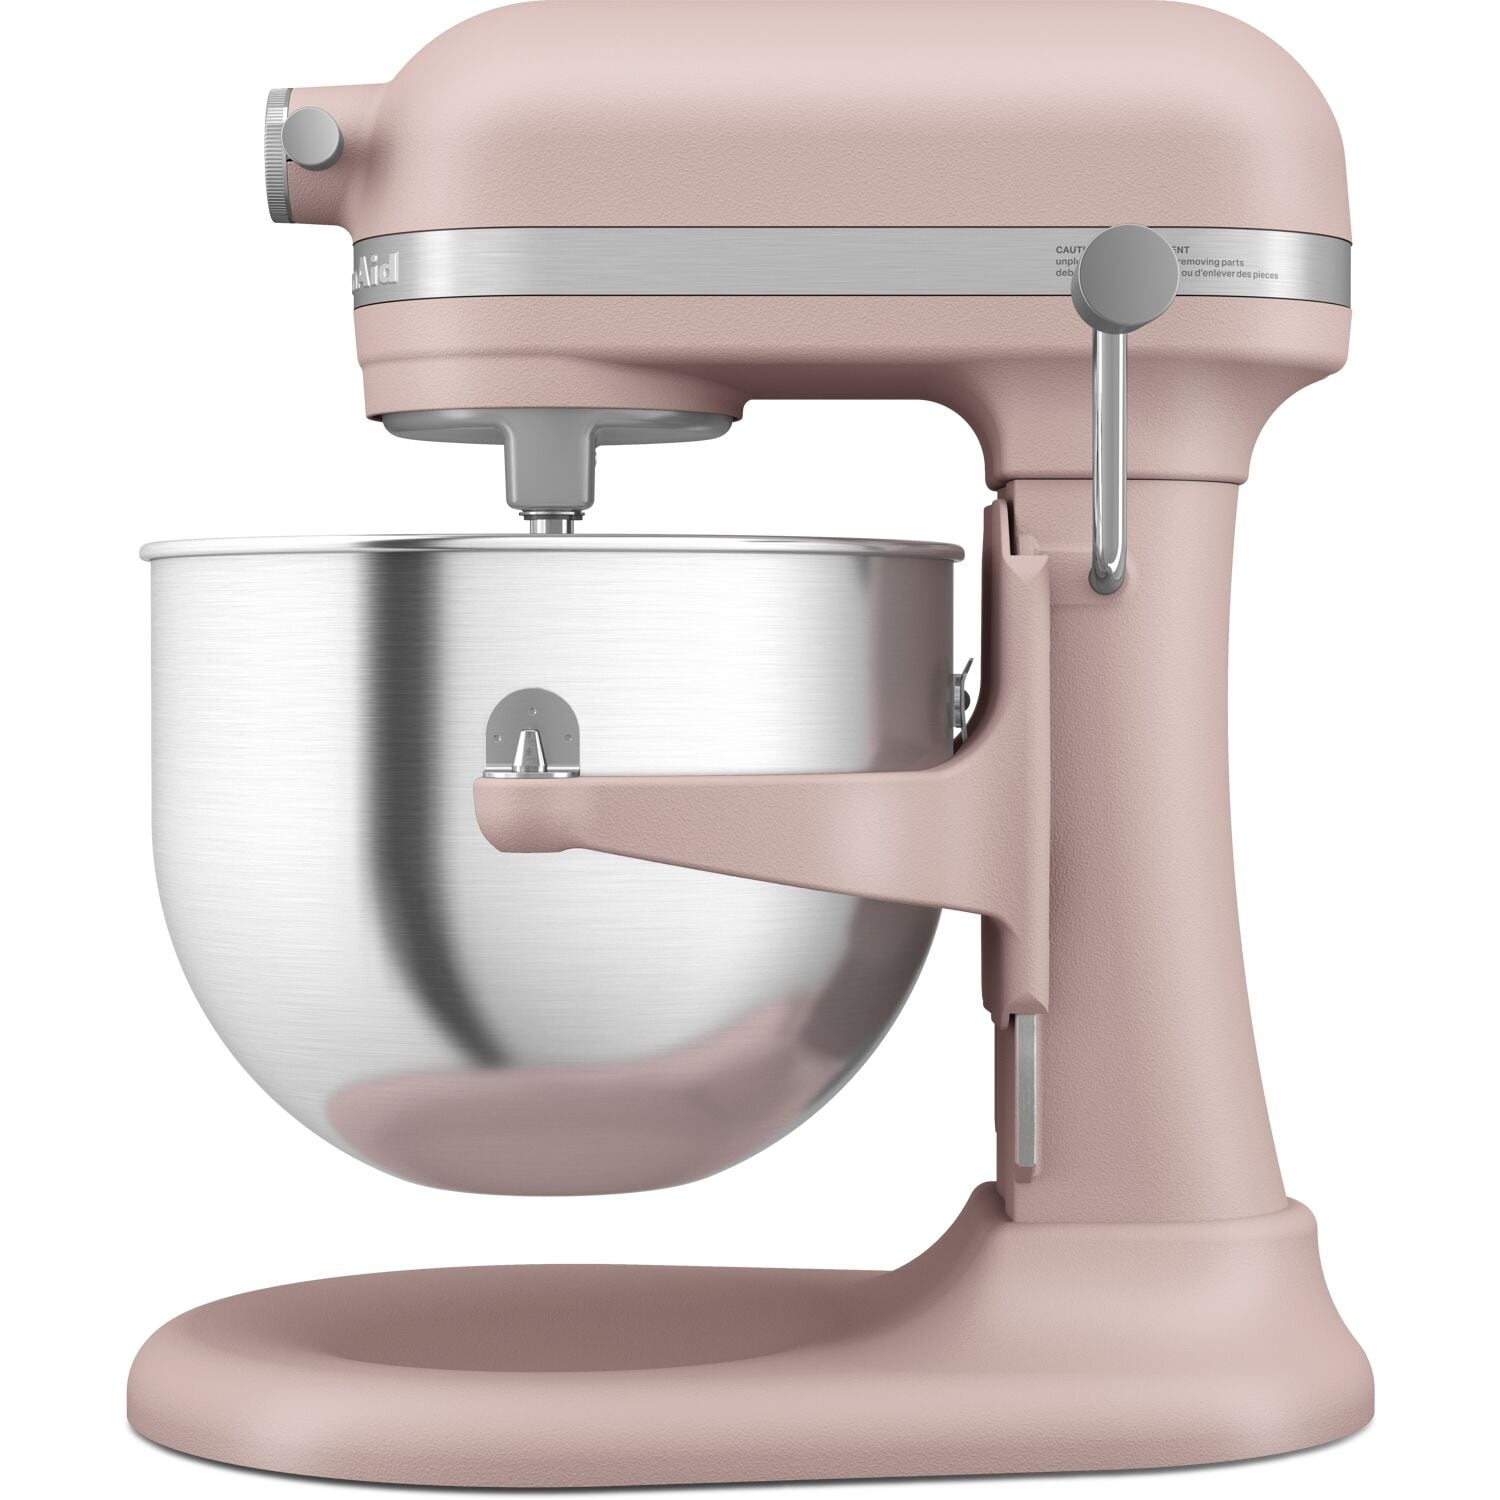 https://ak1.ostkcdn.com/images/products/is/images/direct/042c32ae0d4f076c2fdf4b76267f7535bb9b2e69/KitchenAid-7-Qt.-Bowl-Lift-Stand-Mixer-in-Feather-Pink.jpg